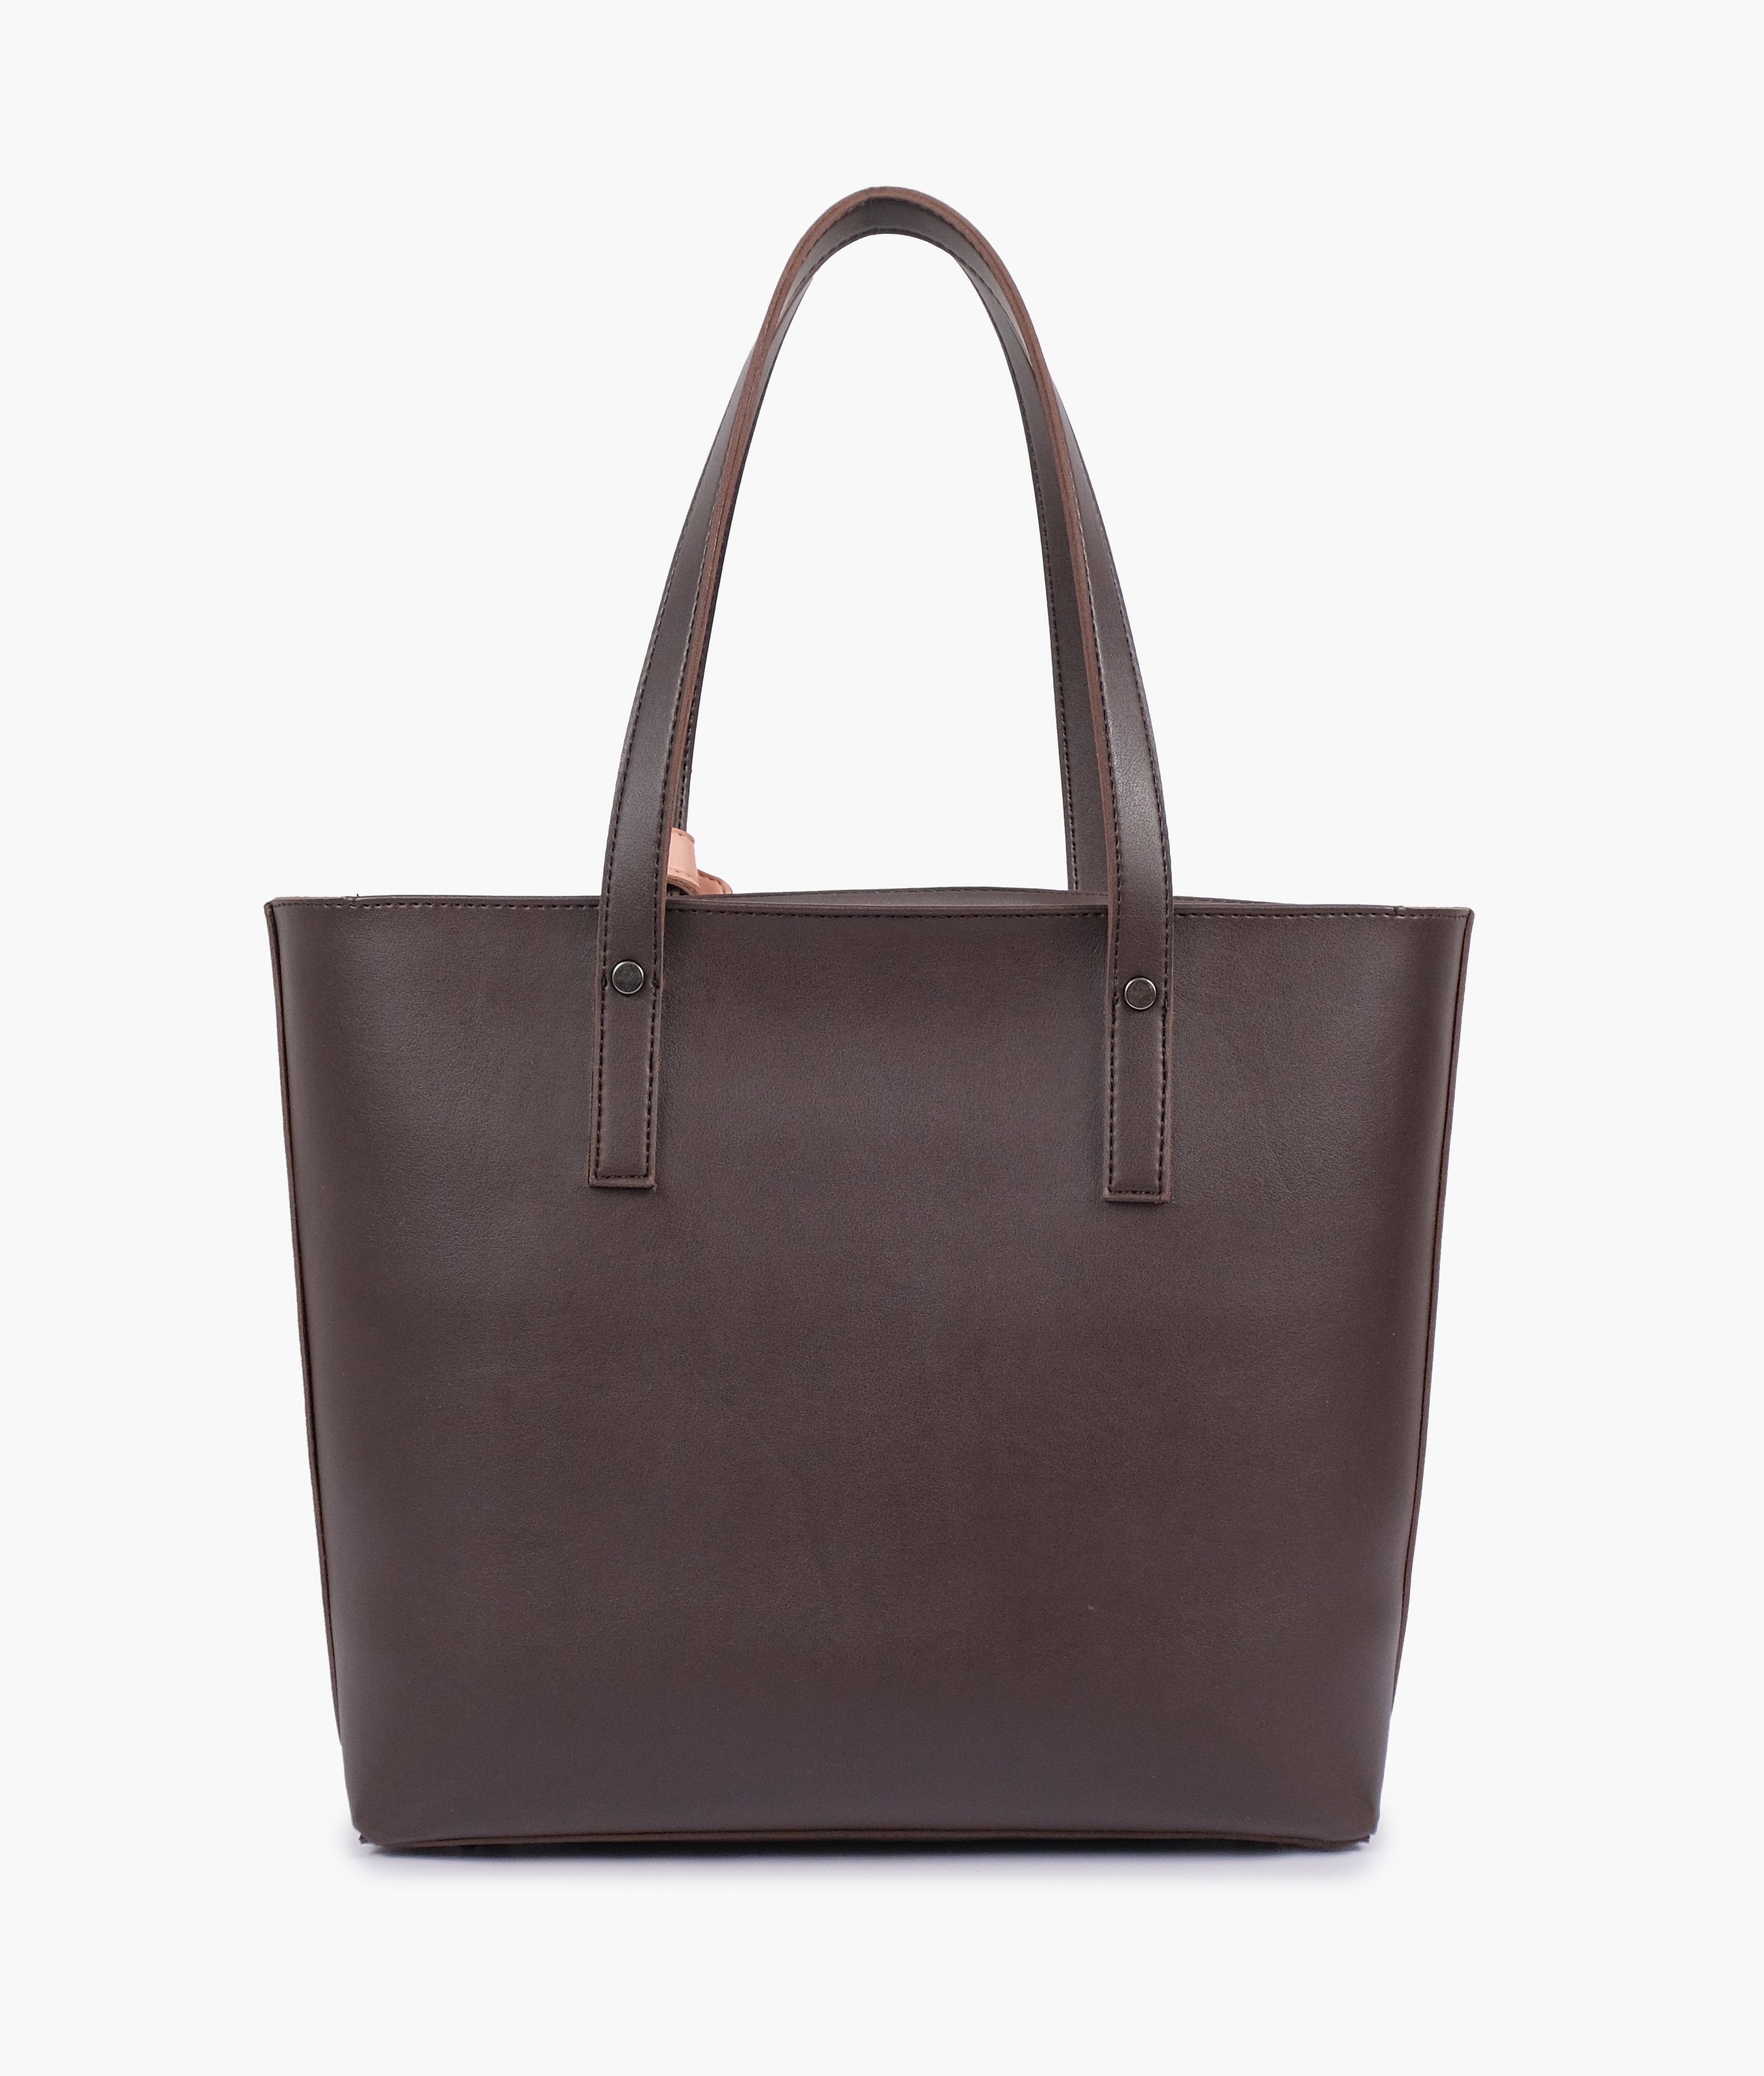 Dark brown tote bag with detachable pouch